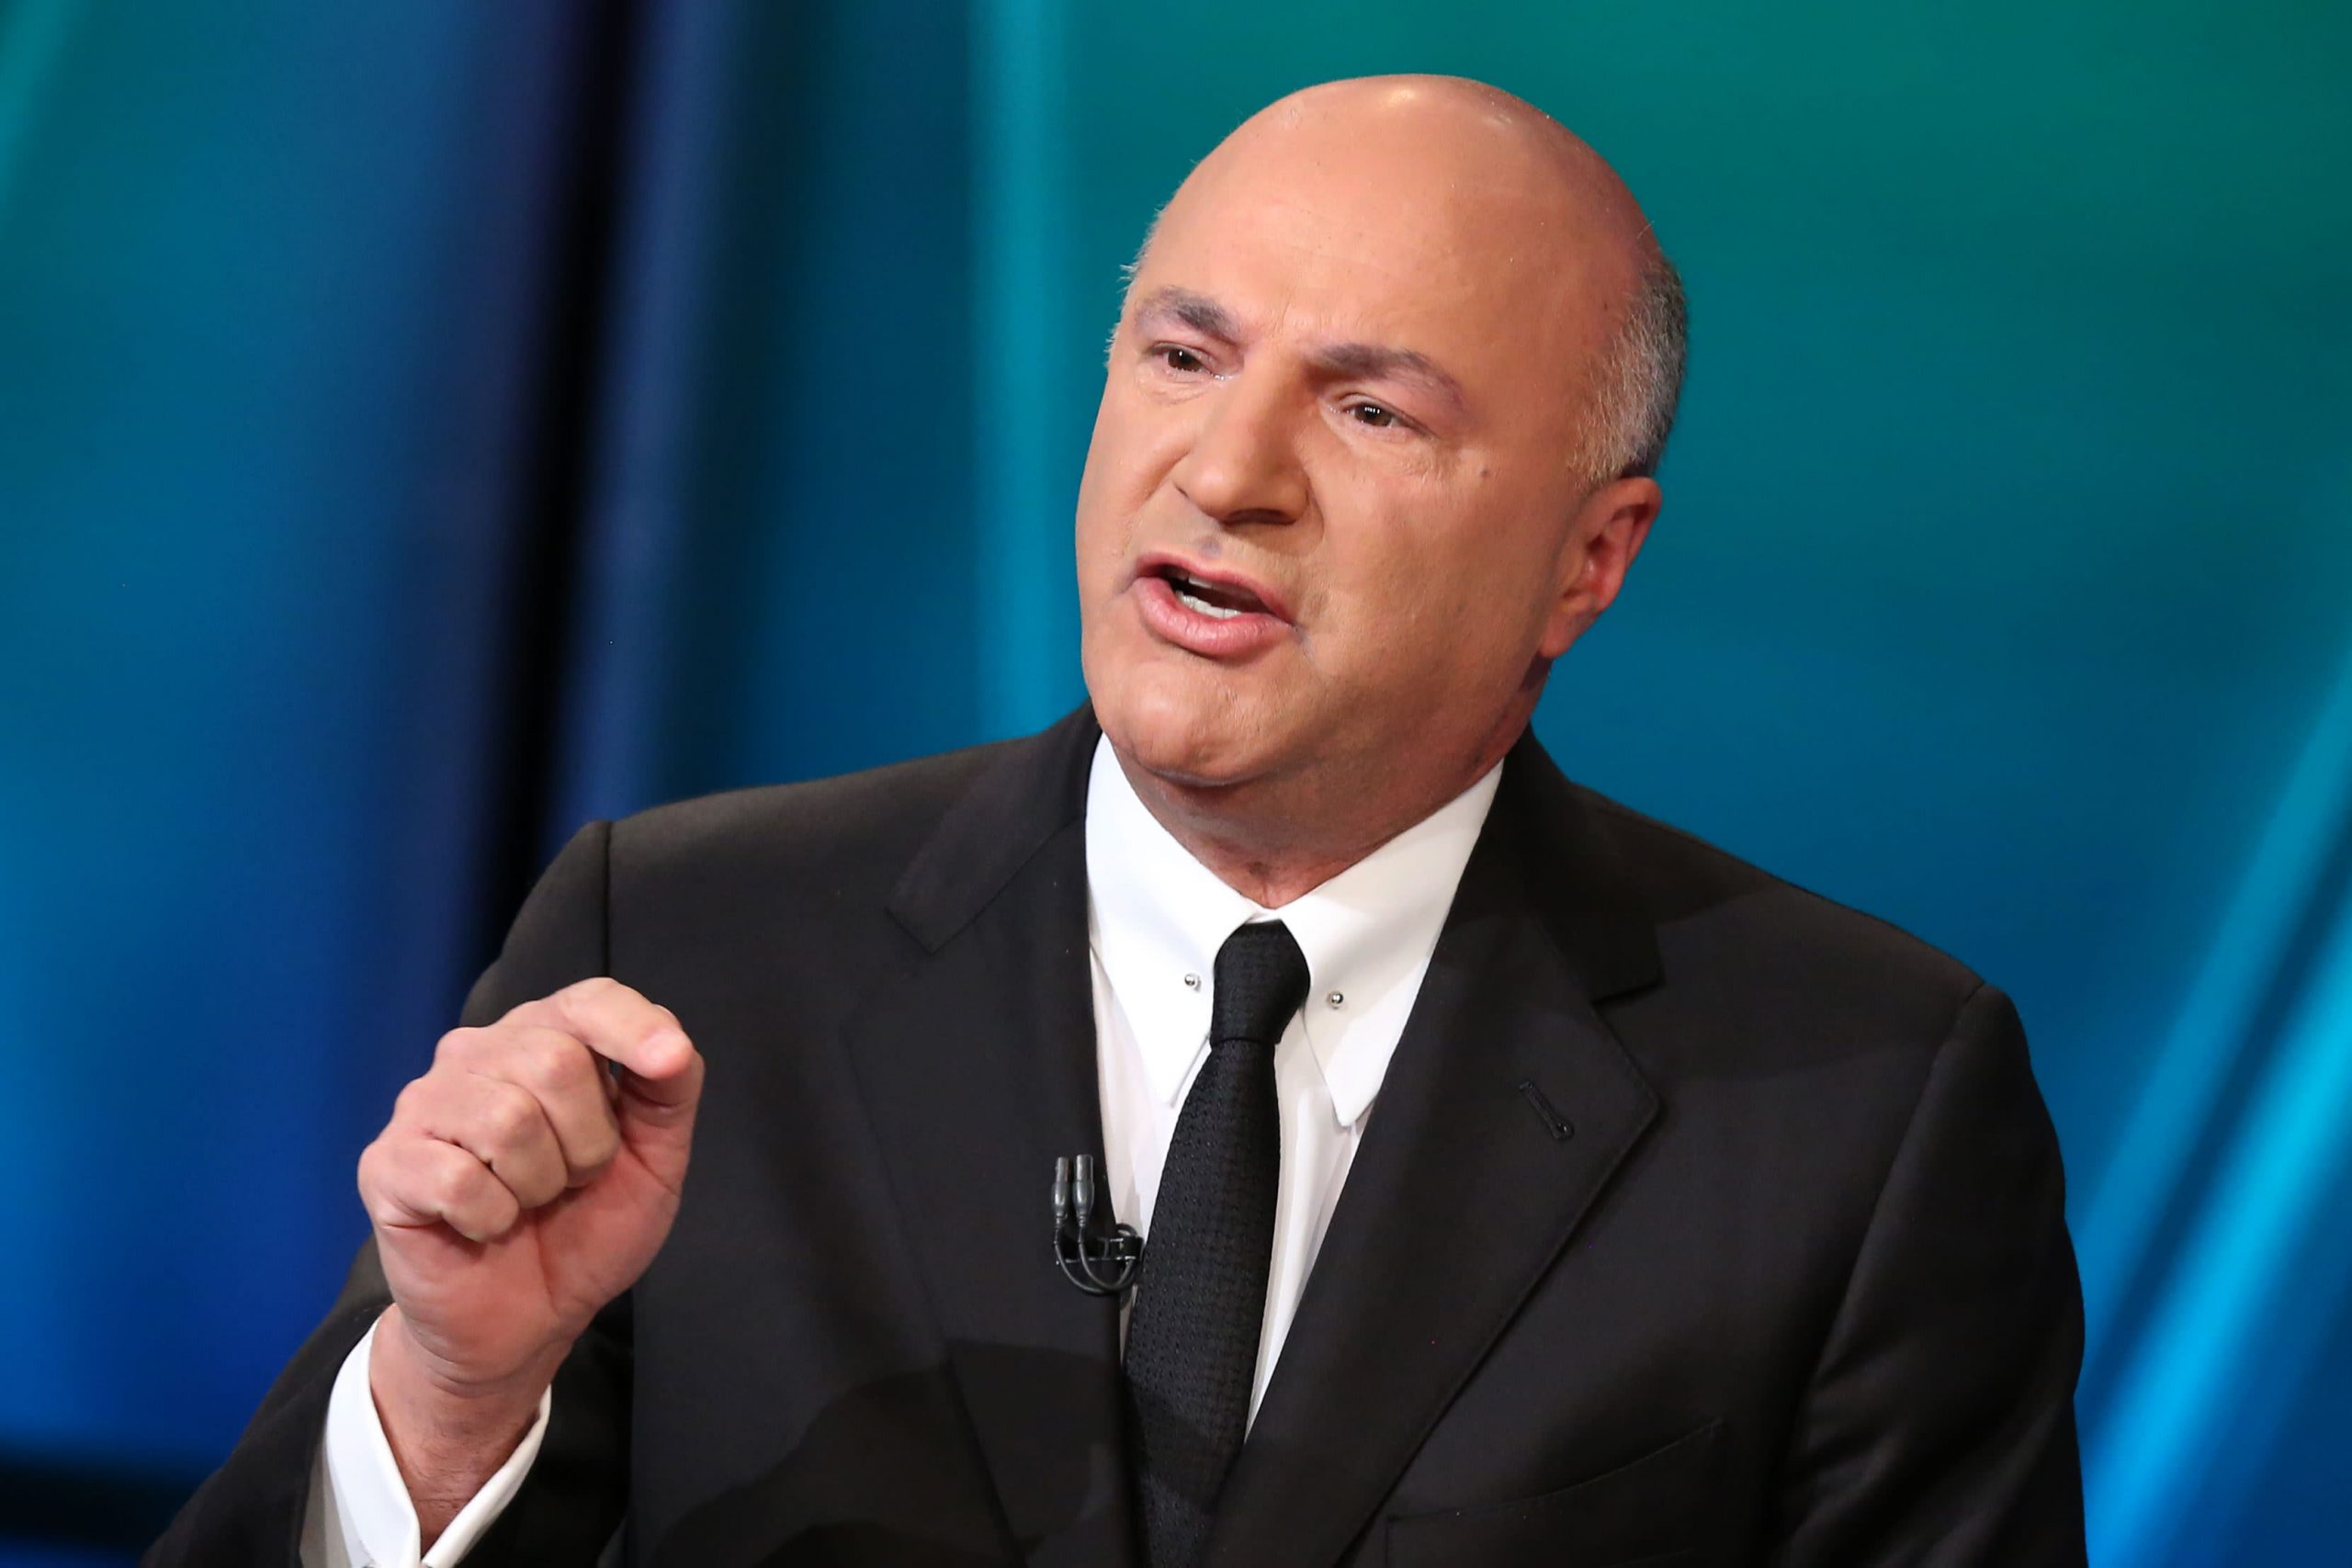 Kevin O’Leary day buying and selling Reddit shares to see if he can beat robo-advisor